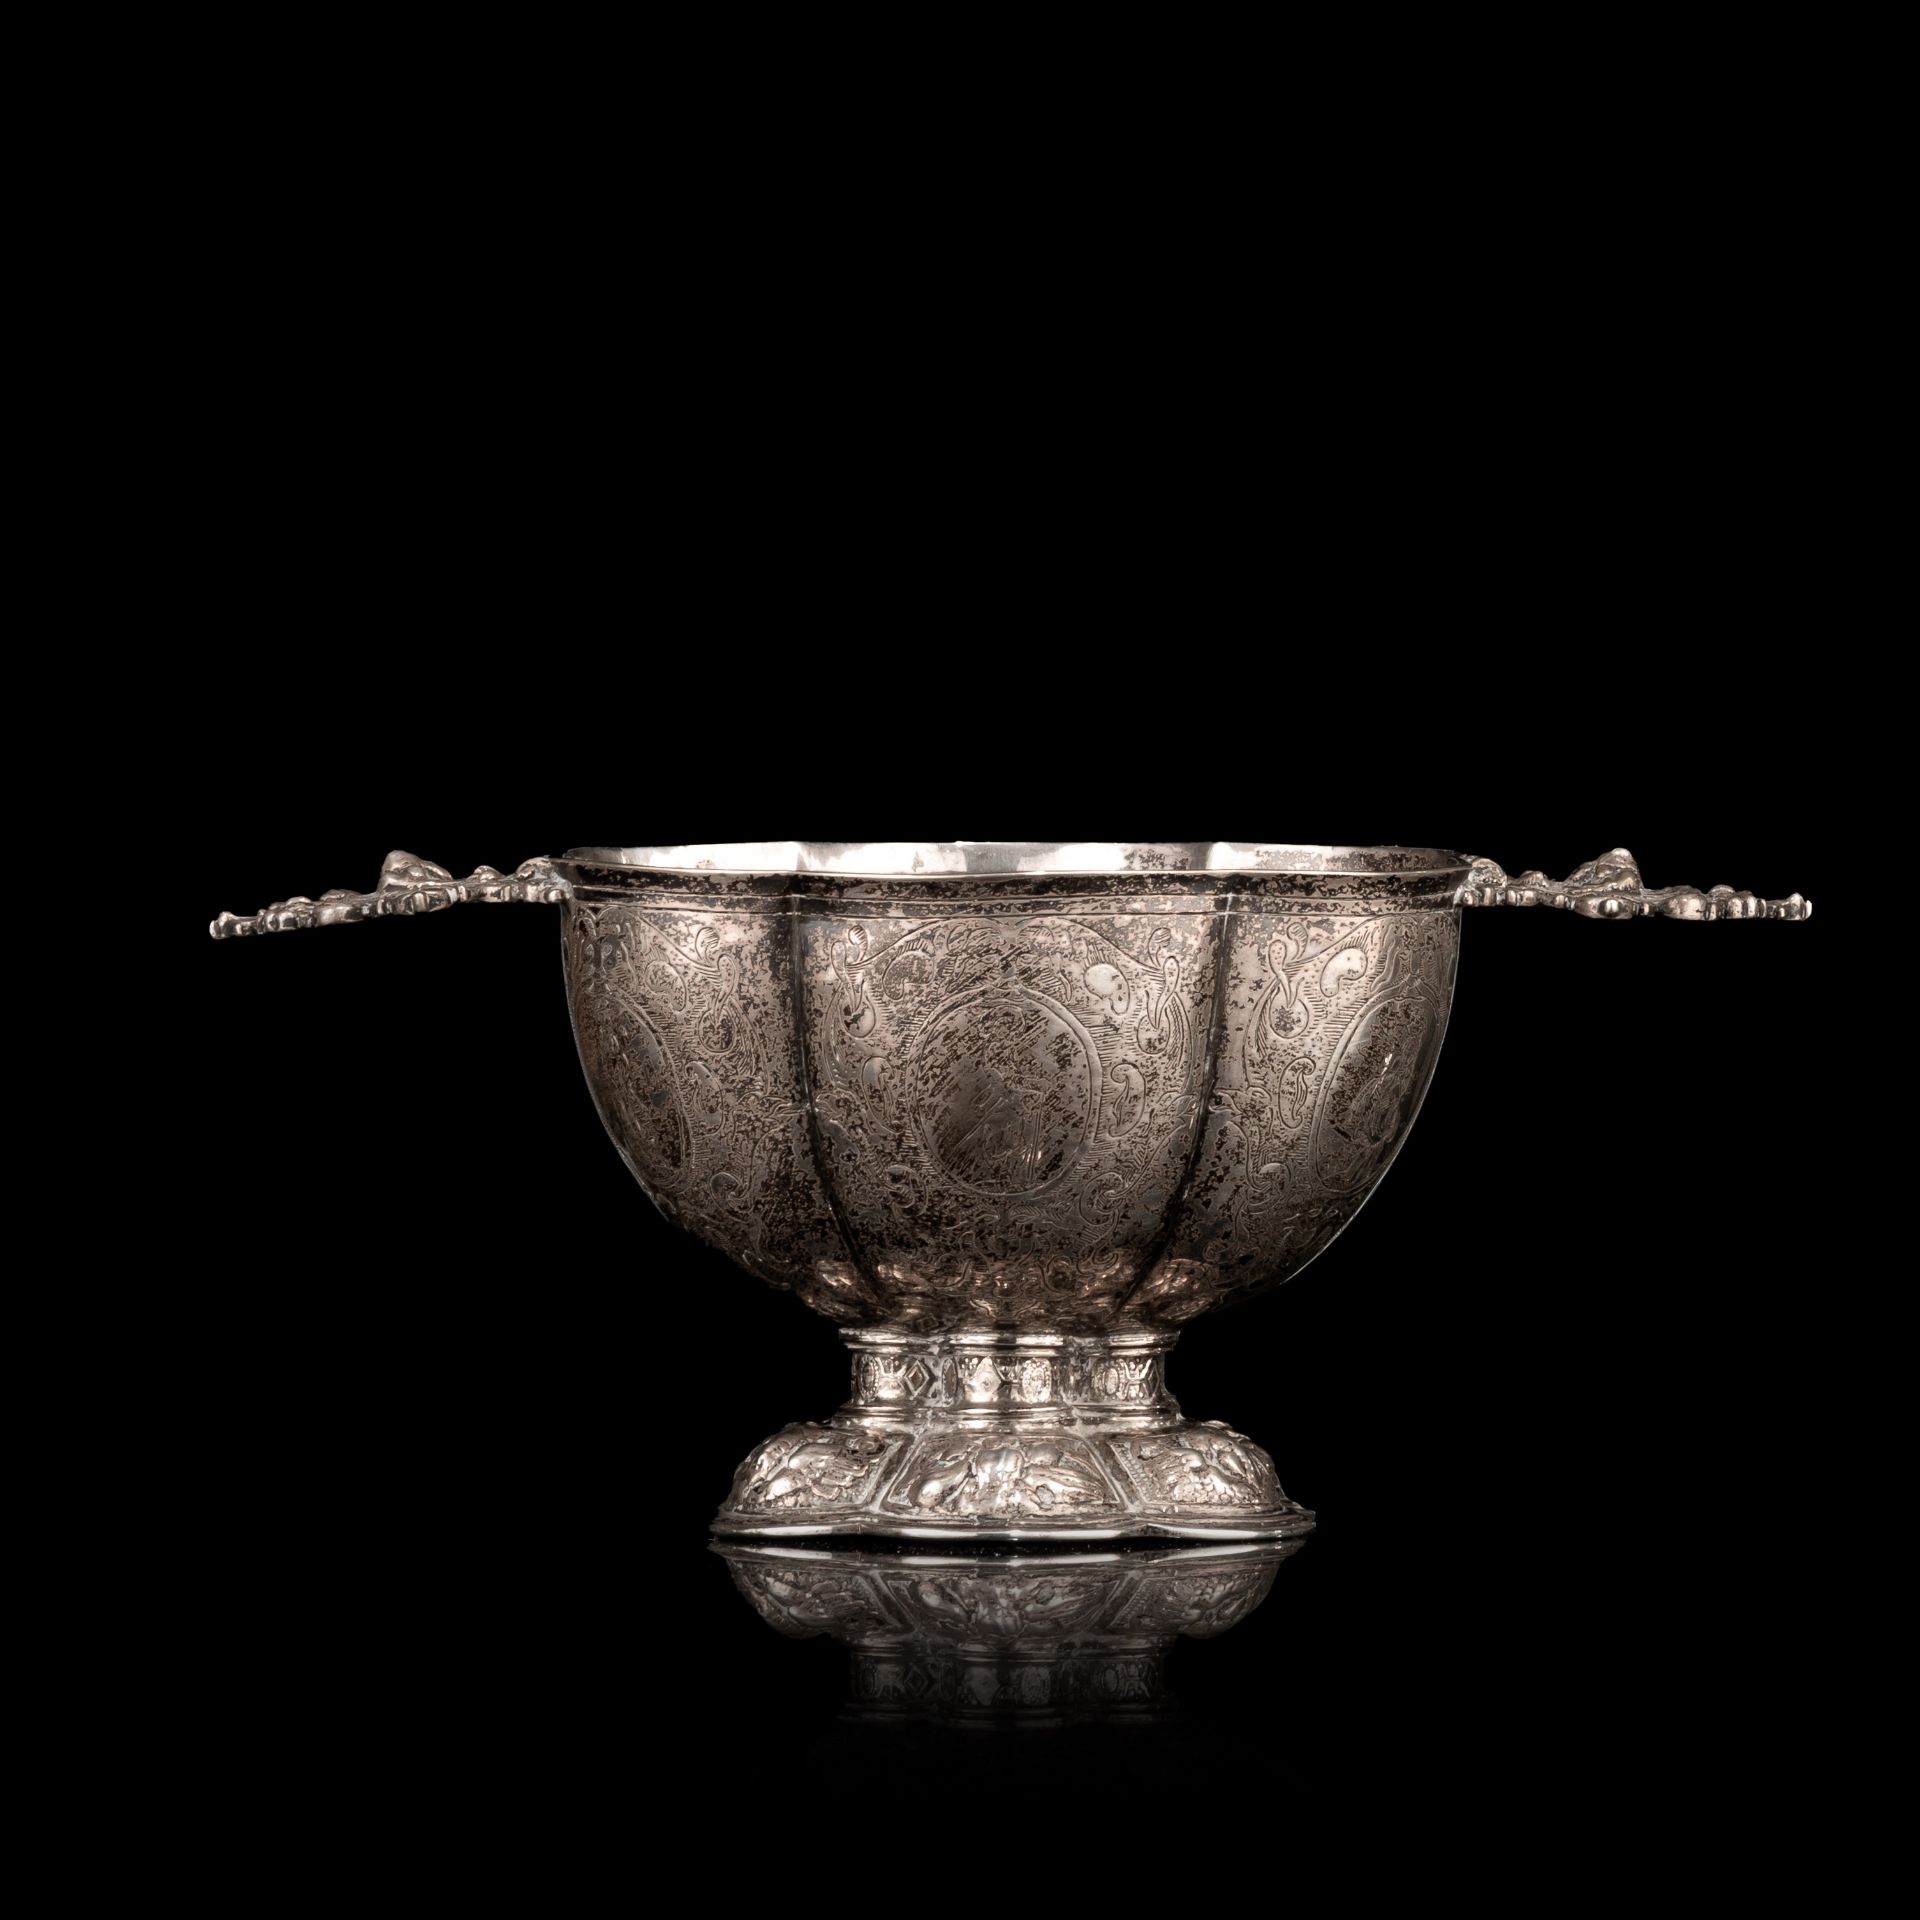 A silver bowl, with apocryphal Dokkum hallmarks, year letter R, H 8 cm, weight: 232 g - Image 4 of 8